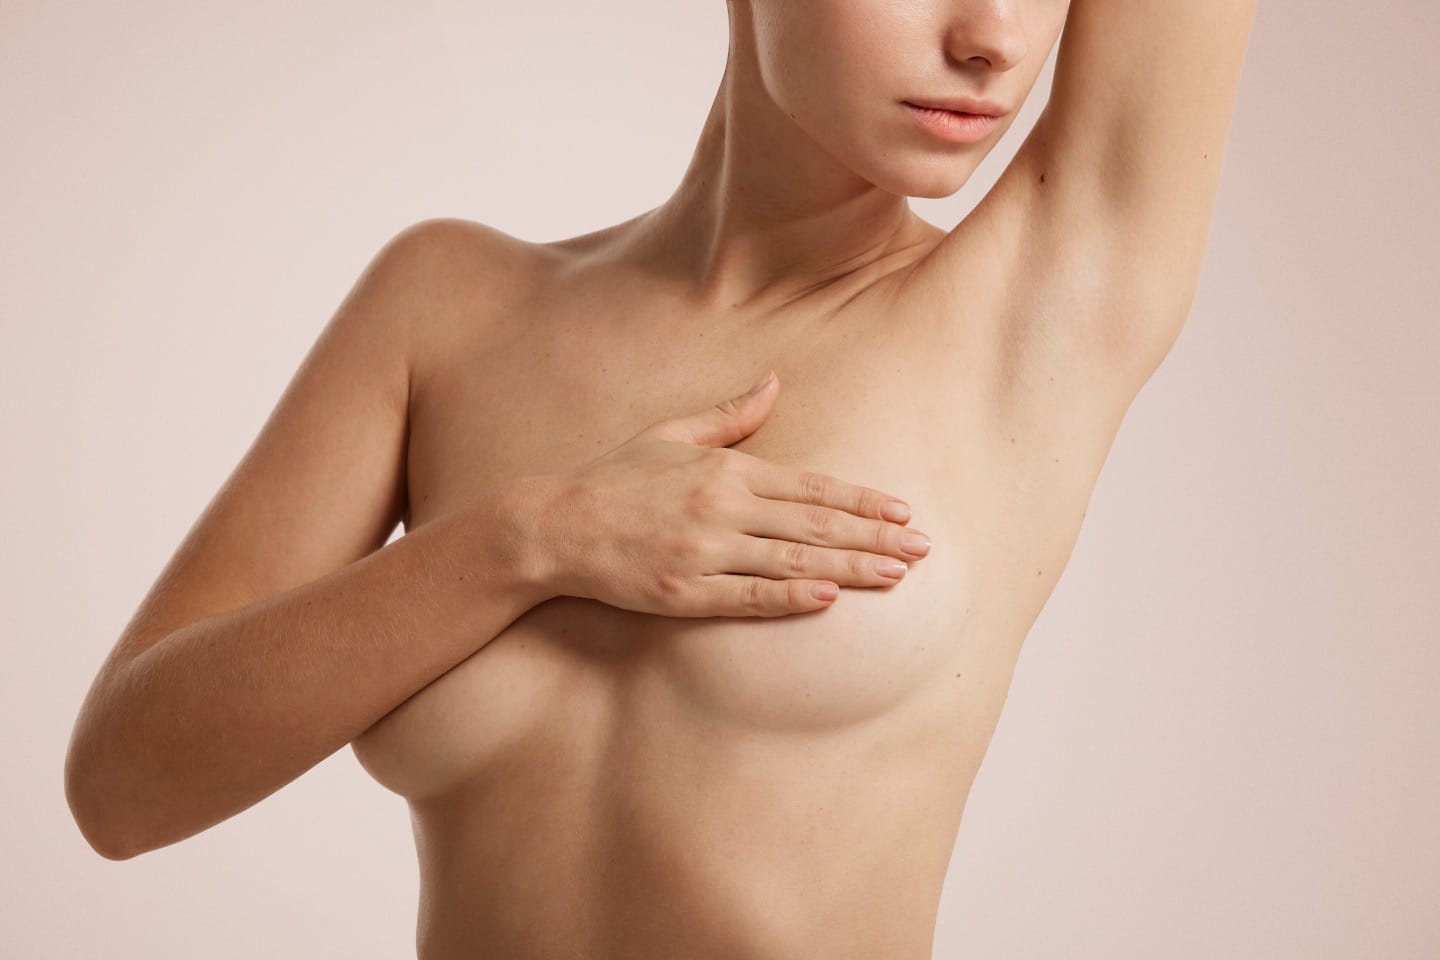 Closeup cropped portrait young woman with breast pain touching